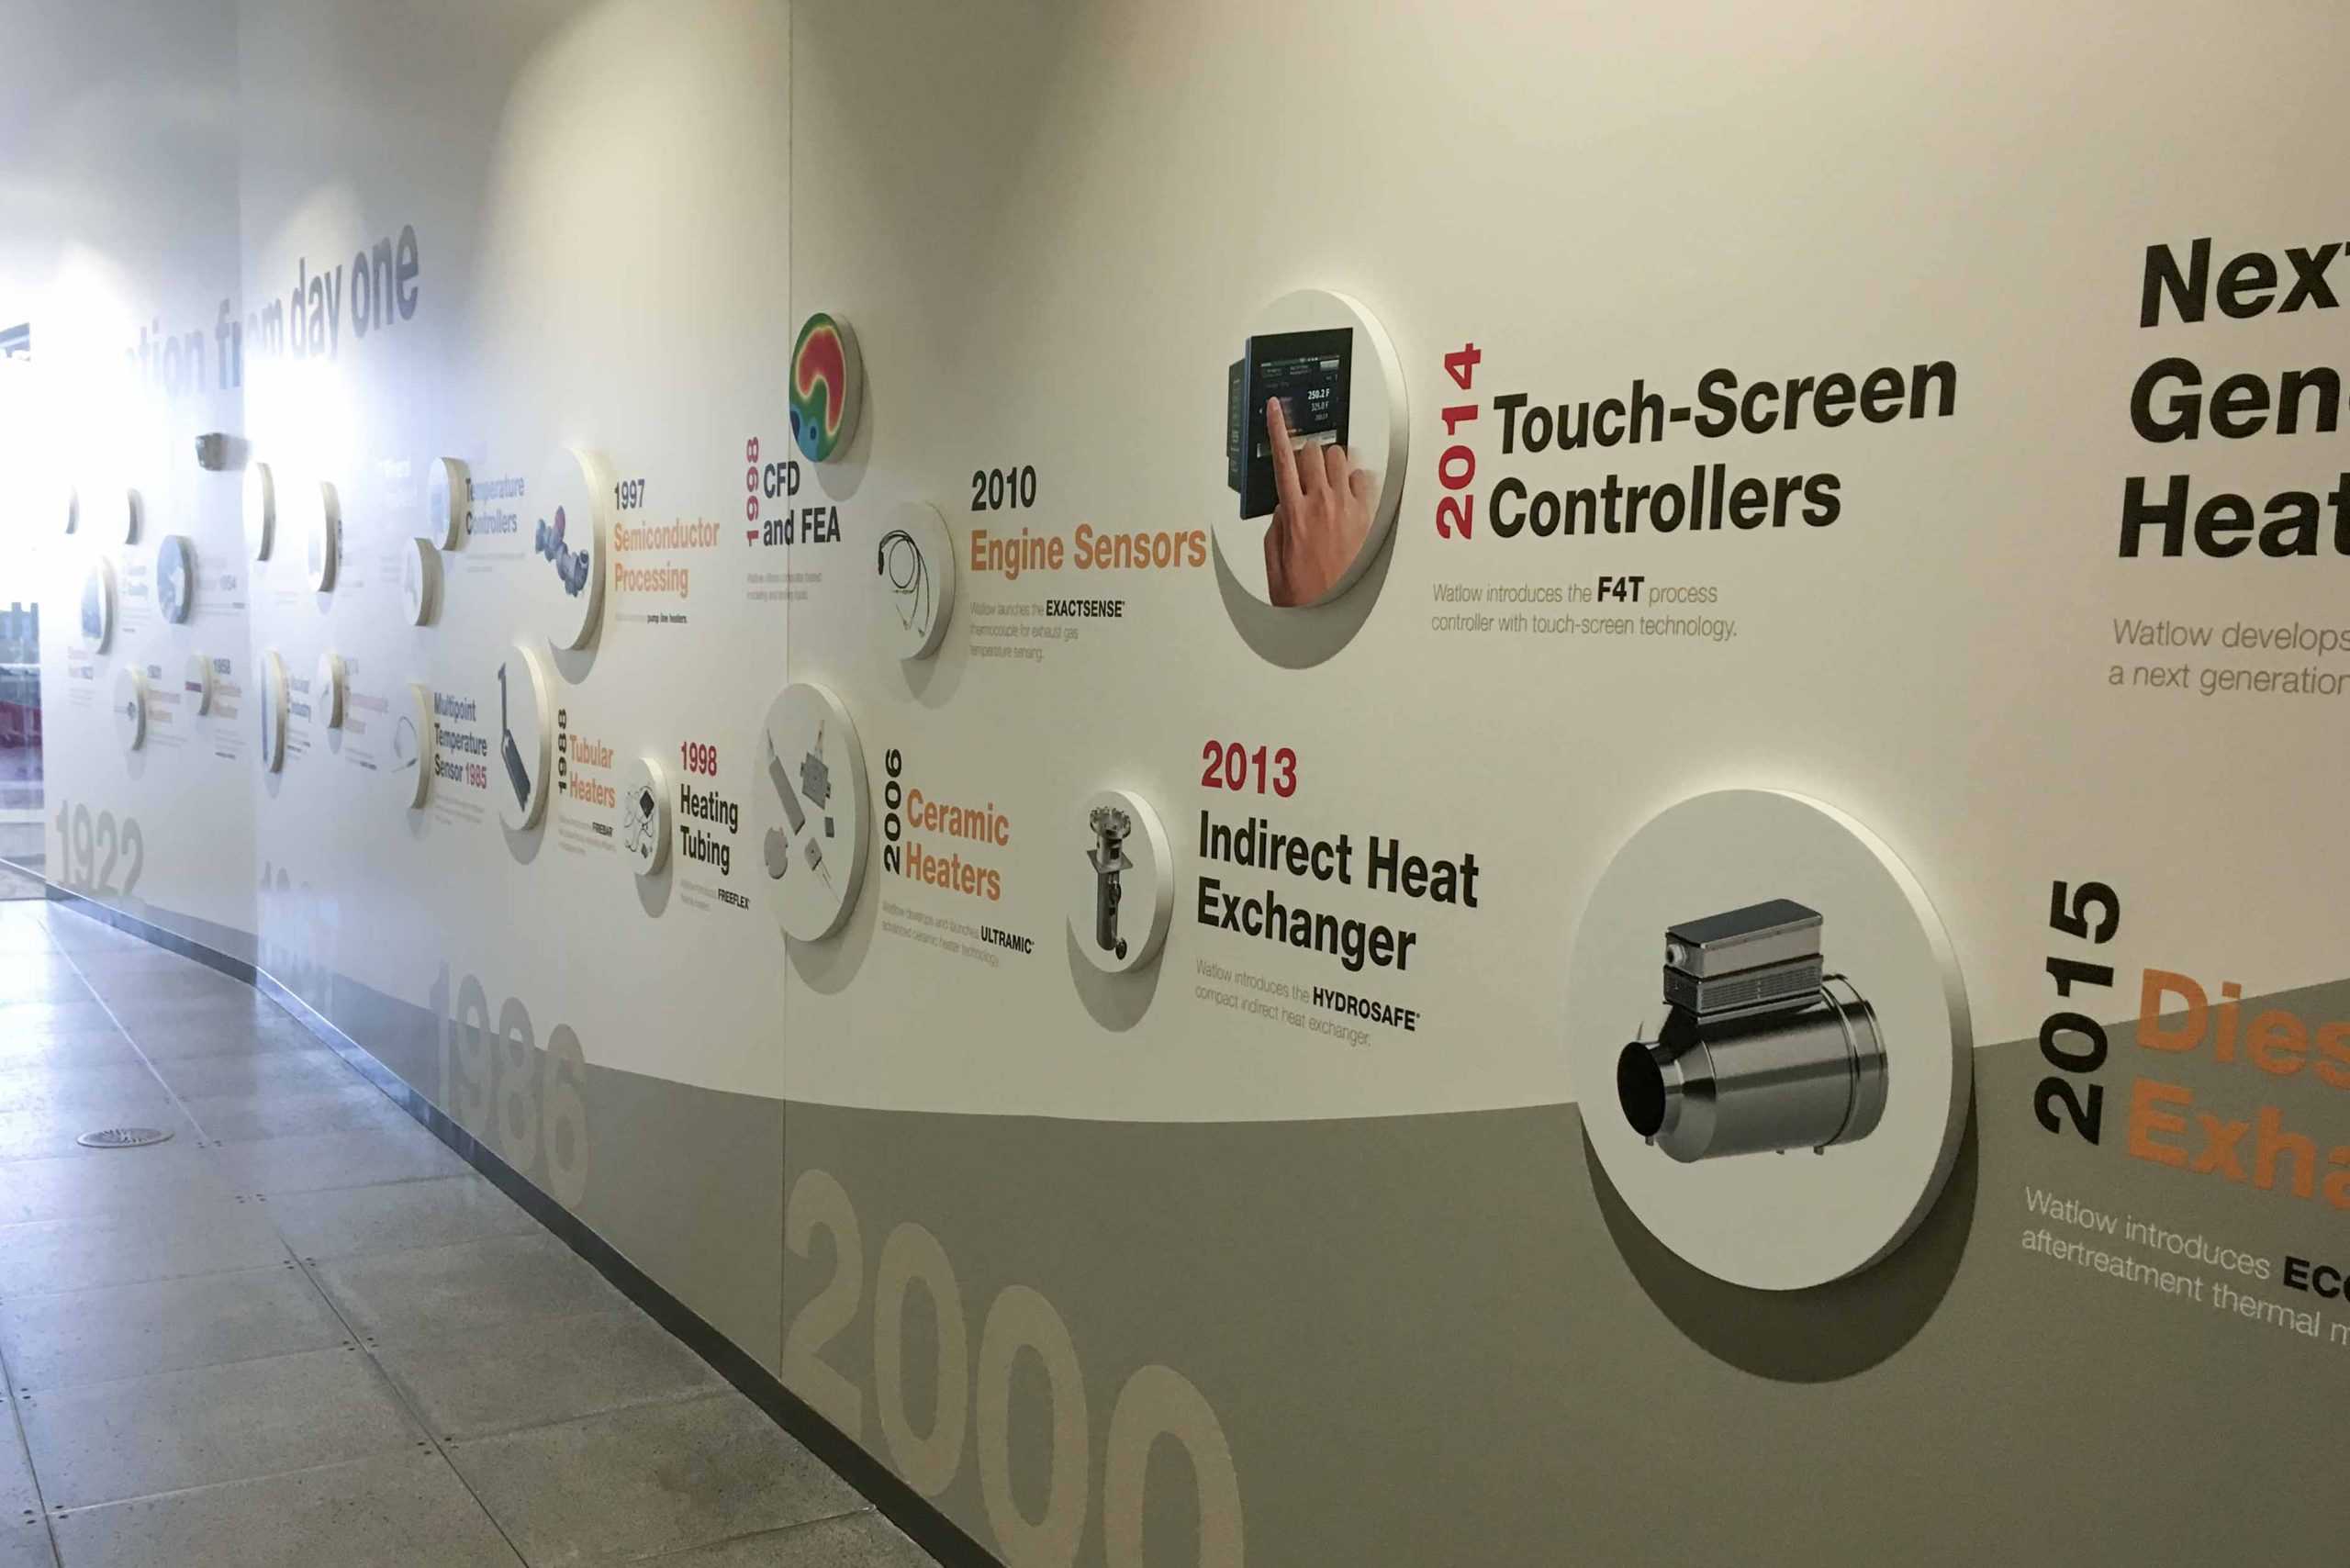 dimensional timeline wall with technology milestones for ATS